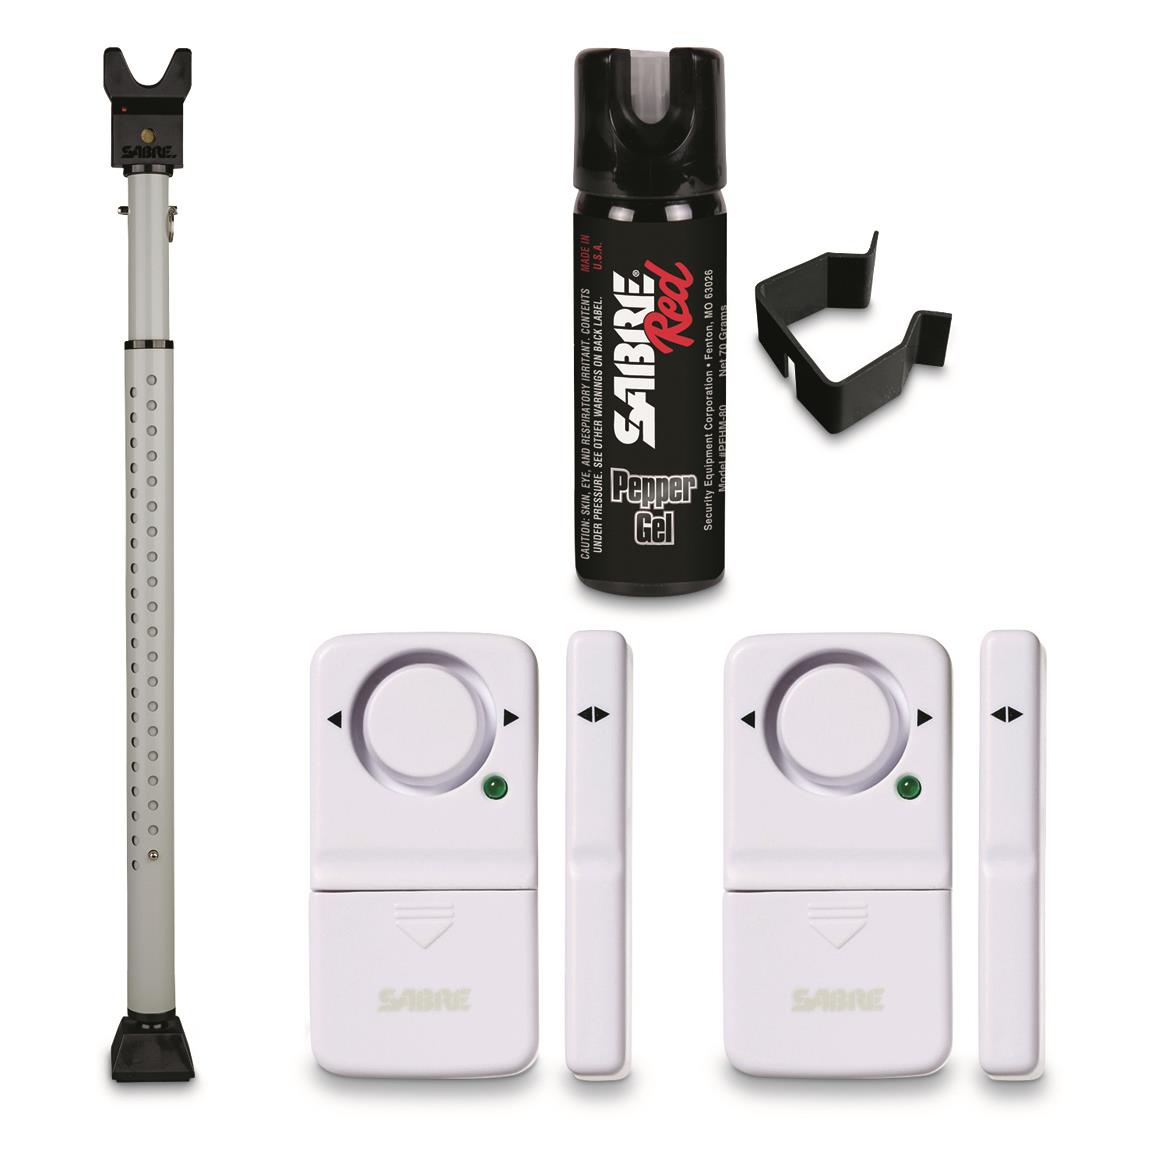 Sabre Total Home Protection Kit